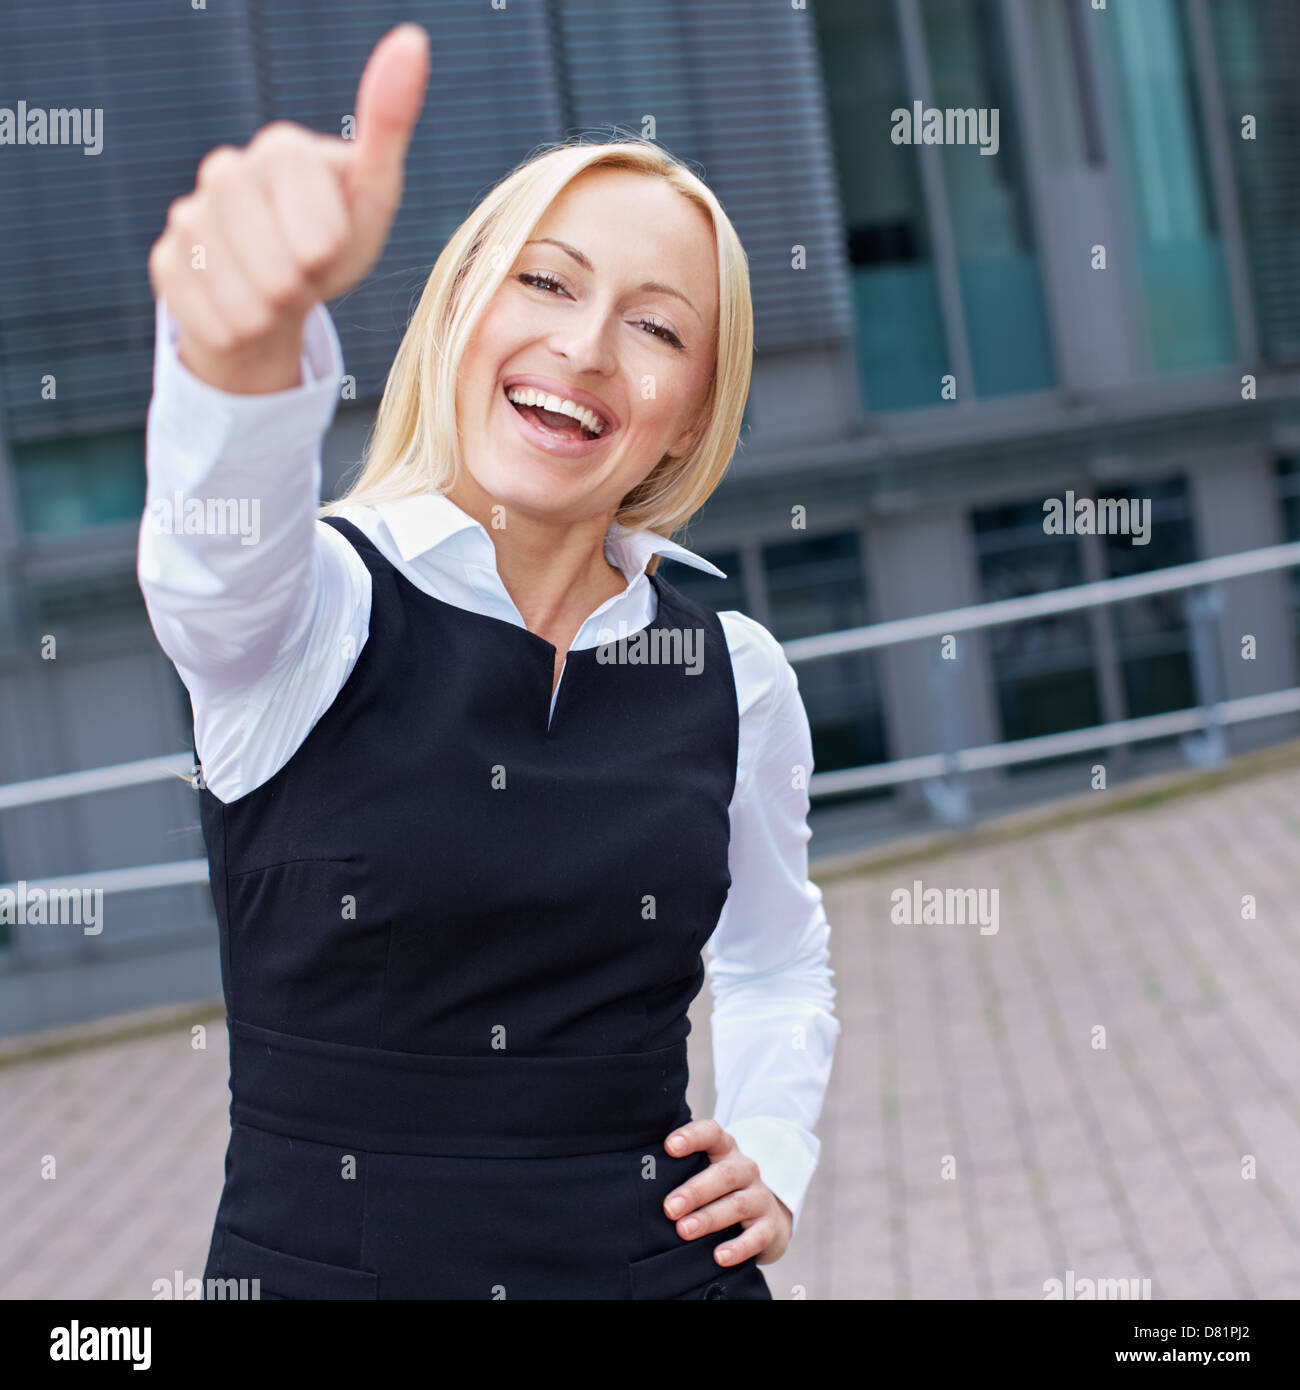 Cheering happy business woman holding her thumbs up Stock Photo